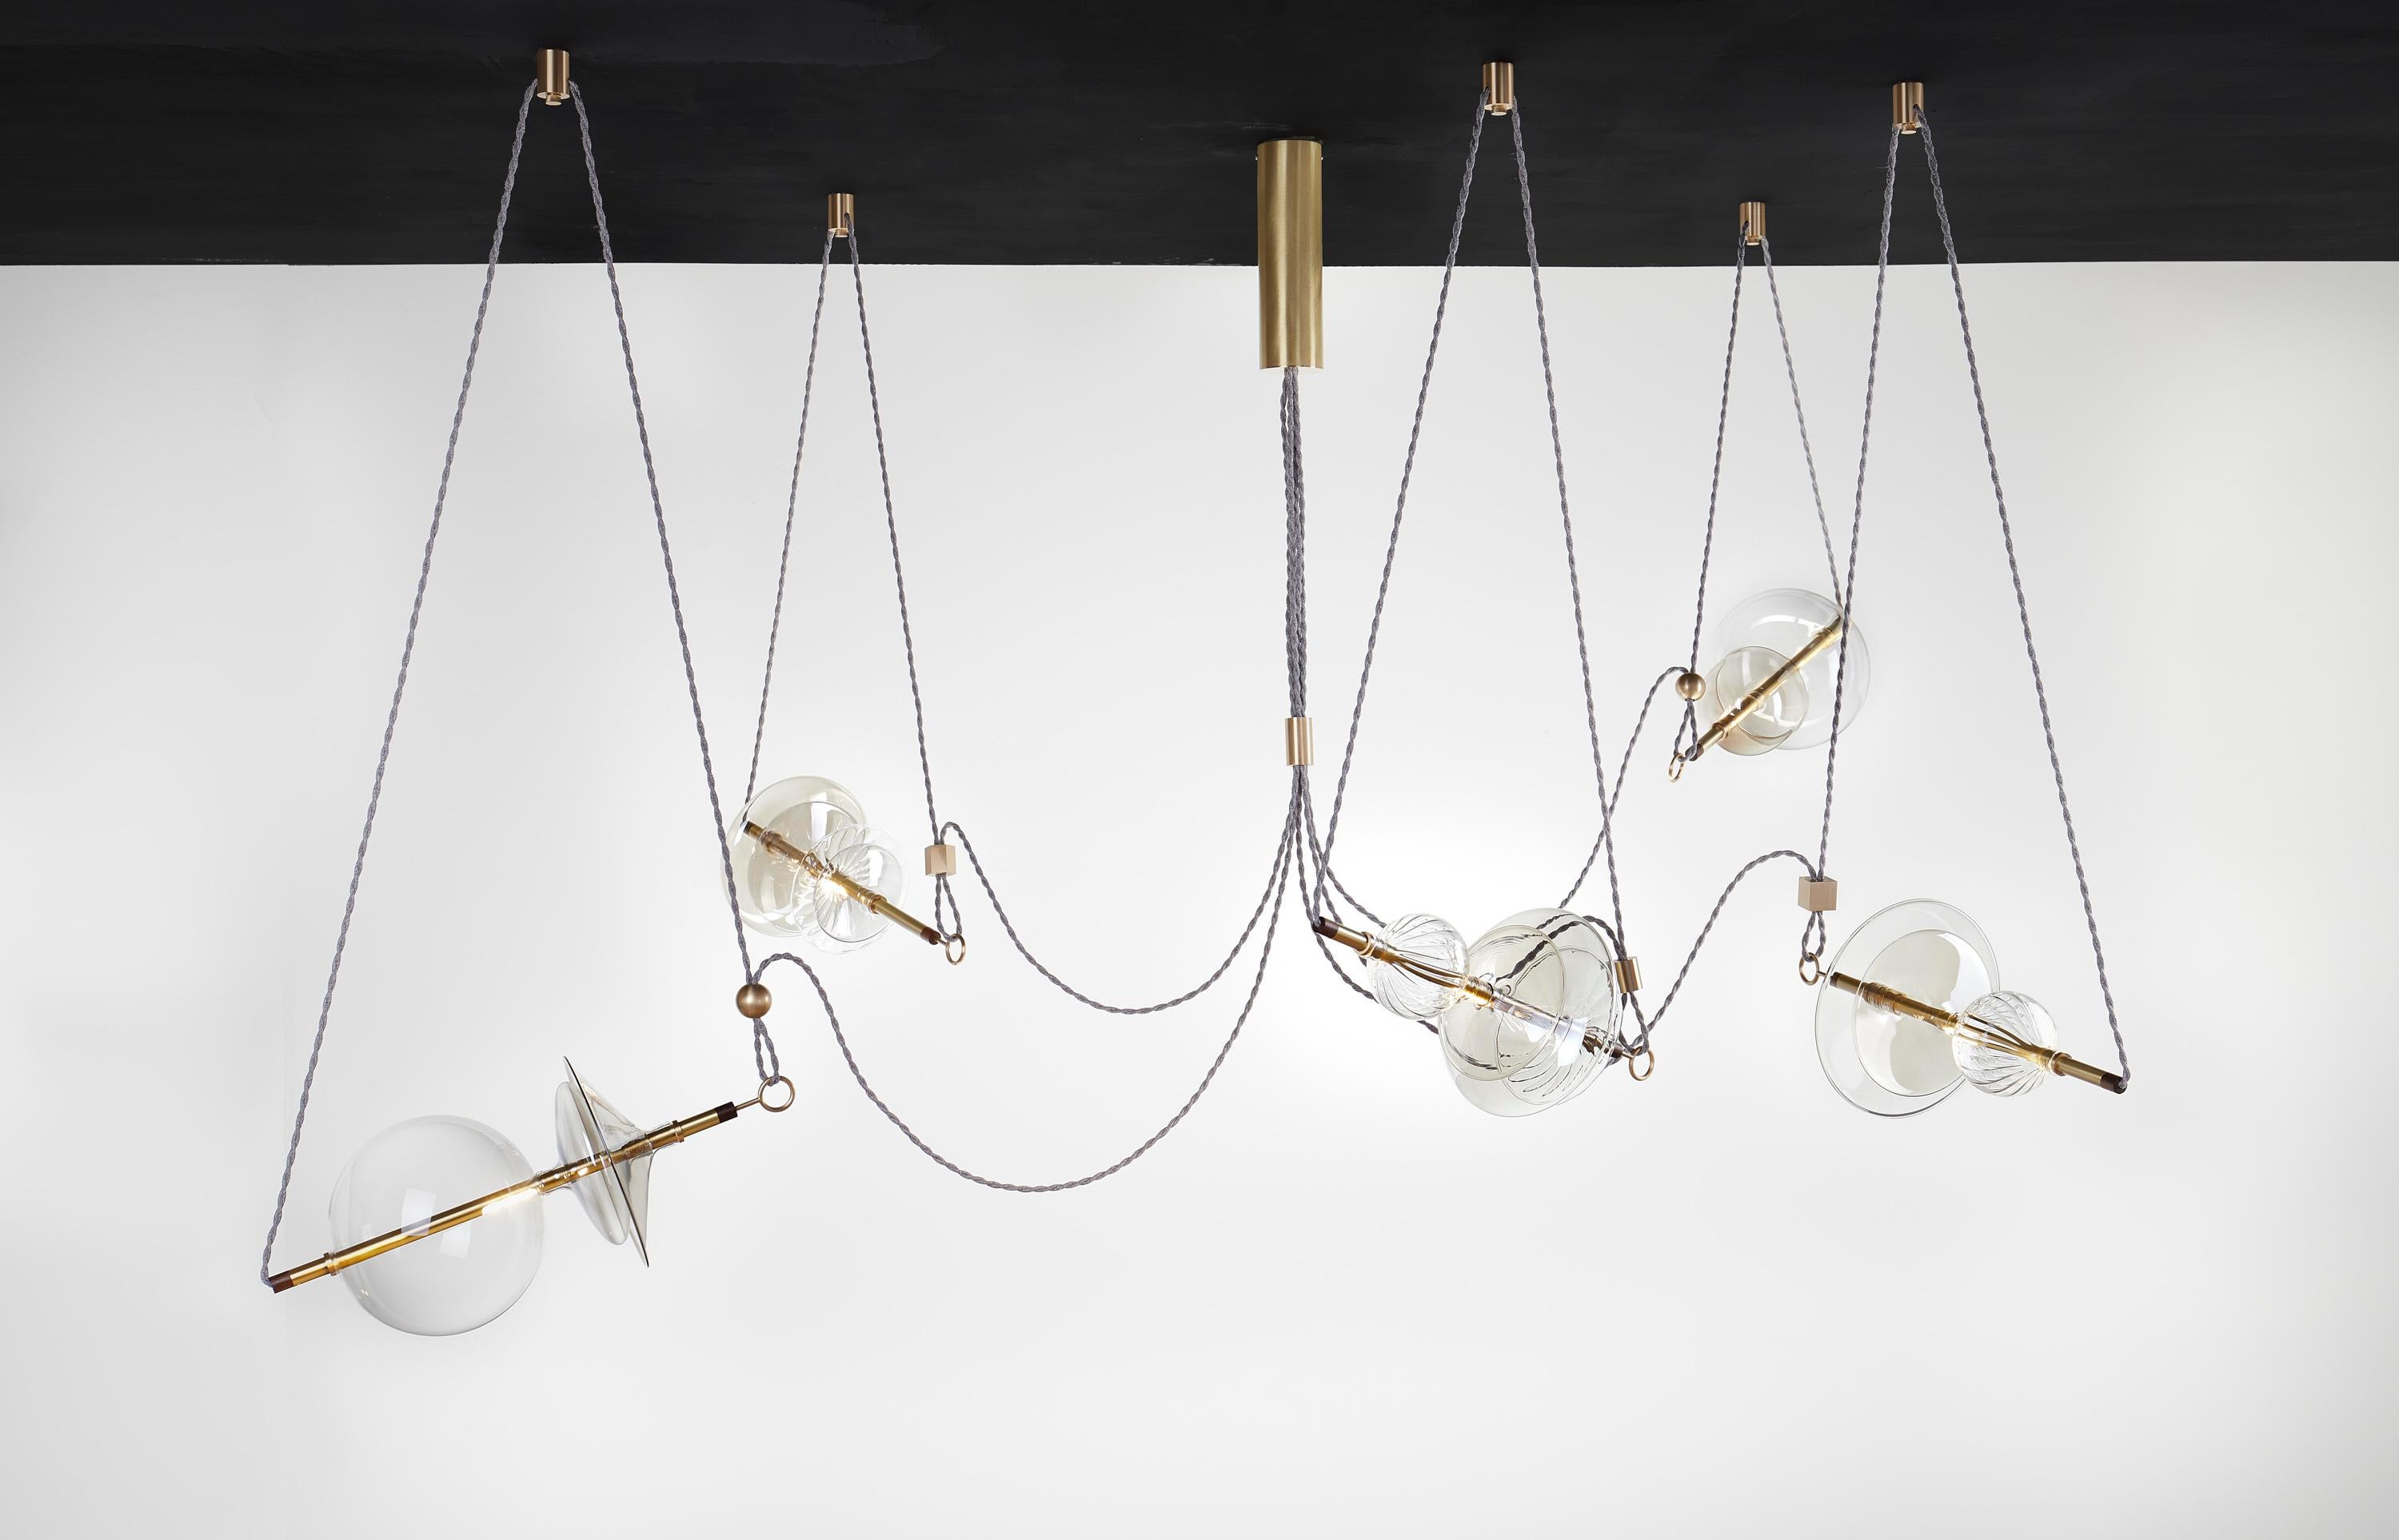 The Trapezi contemporary chandelier is inspired by the idea of a Circus Trapeze artist.

Hand blown glass in a variety of forms and colors is combined with brass bars and hung by Linen Cords from hub units on the ceiling.
The glass is left